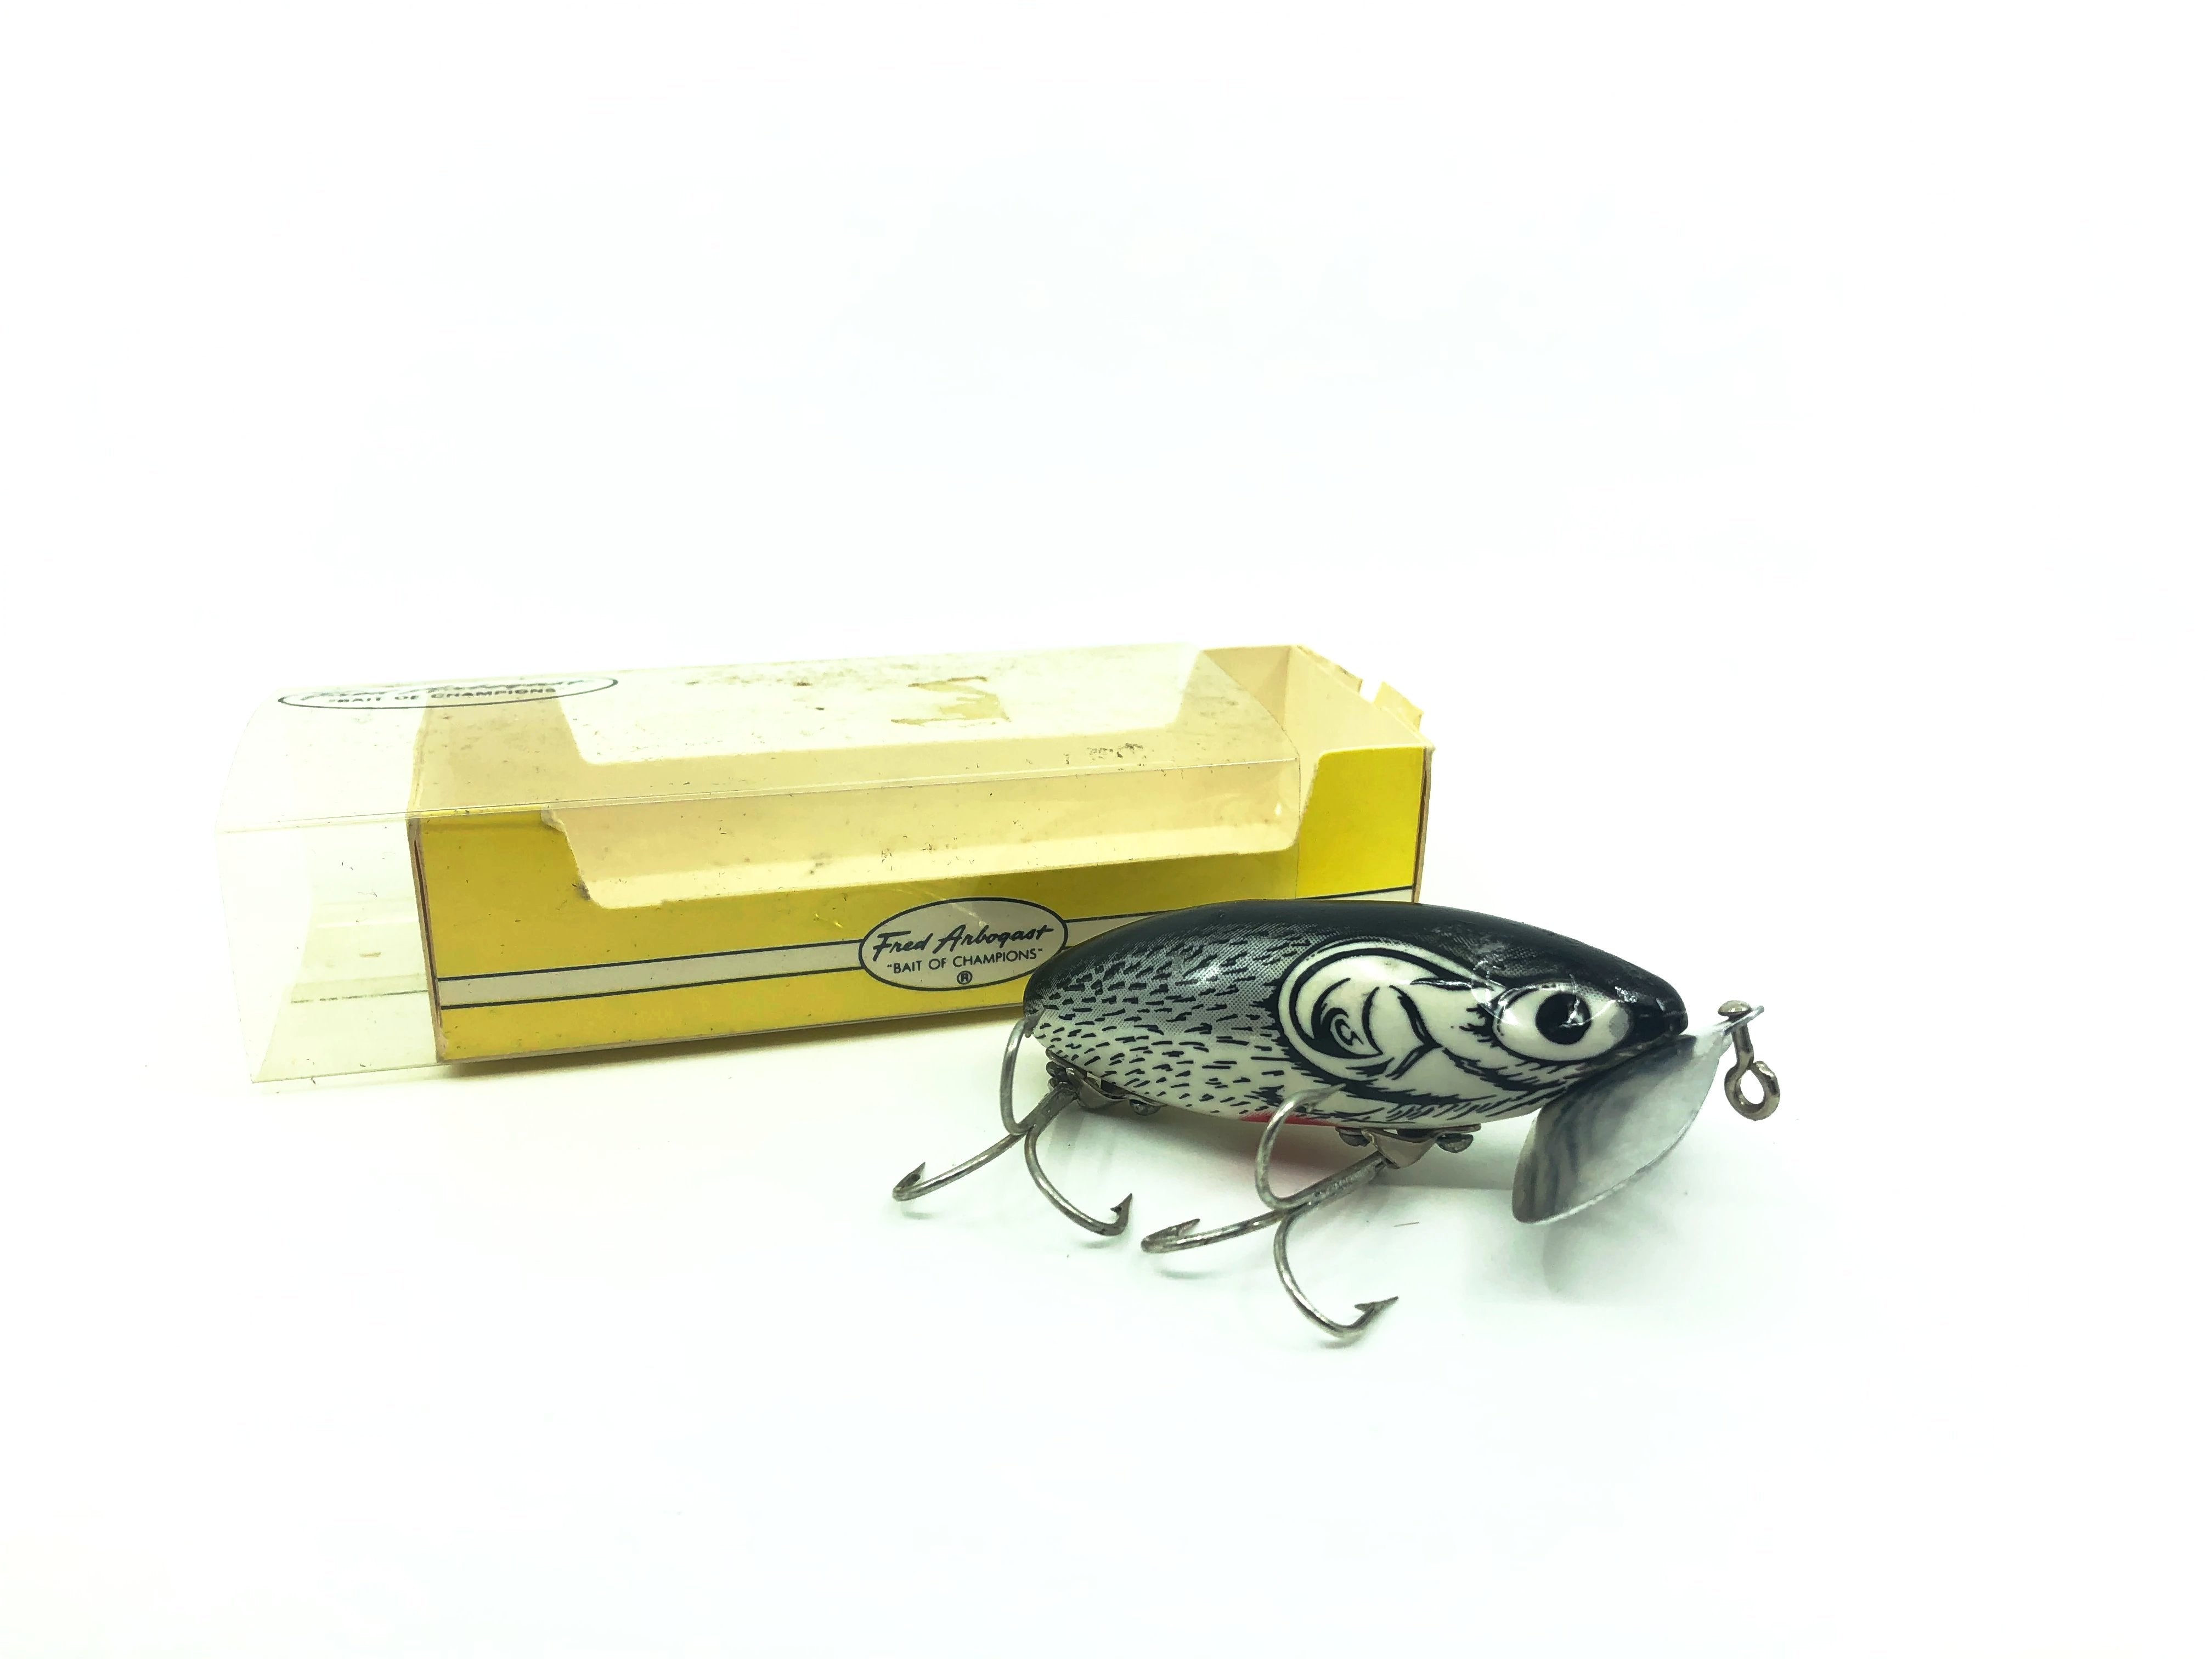 VINTAGE FRED ARBOGAST JITTERBUG LURE in RED WING BLACKBIRD